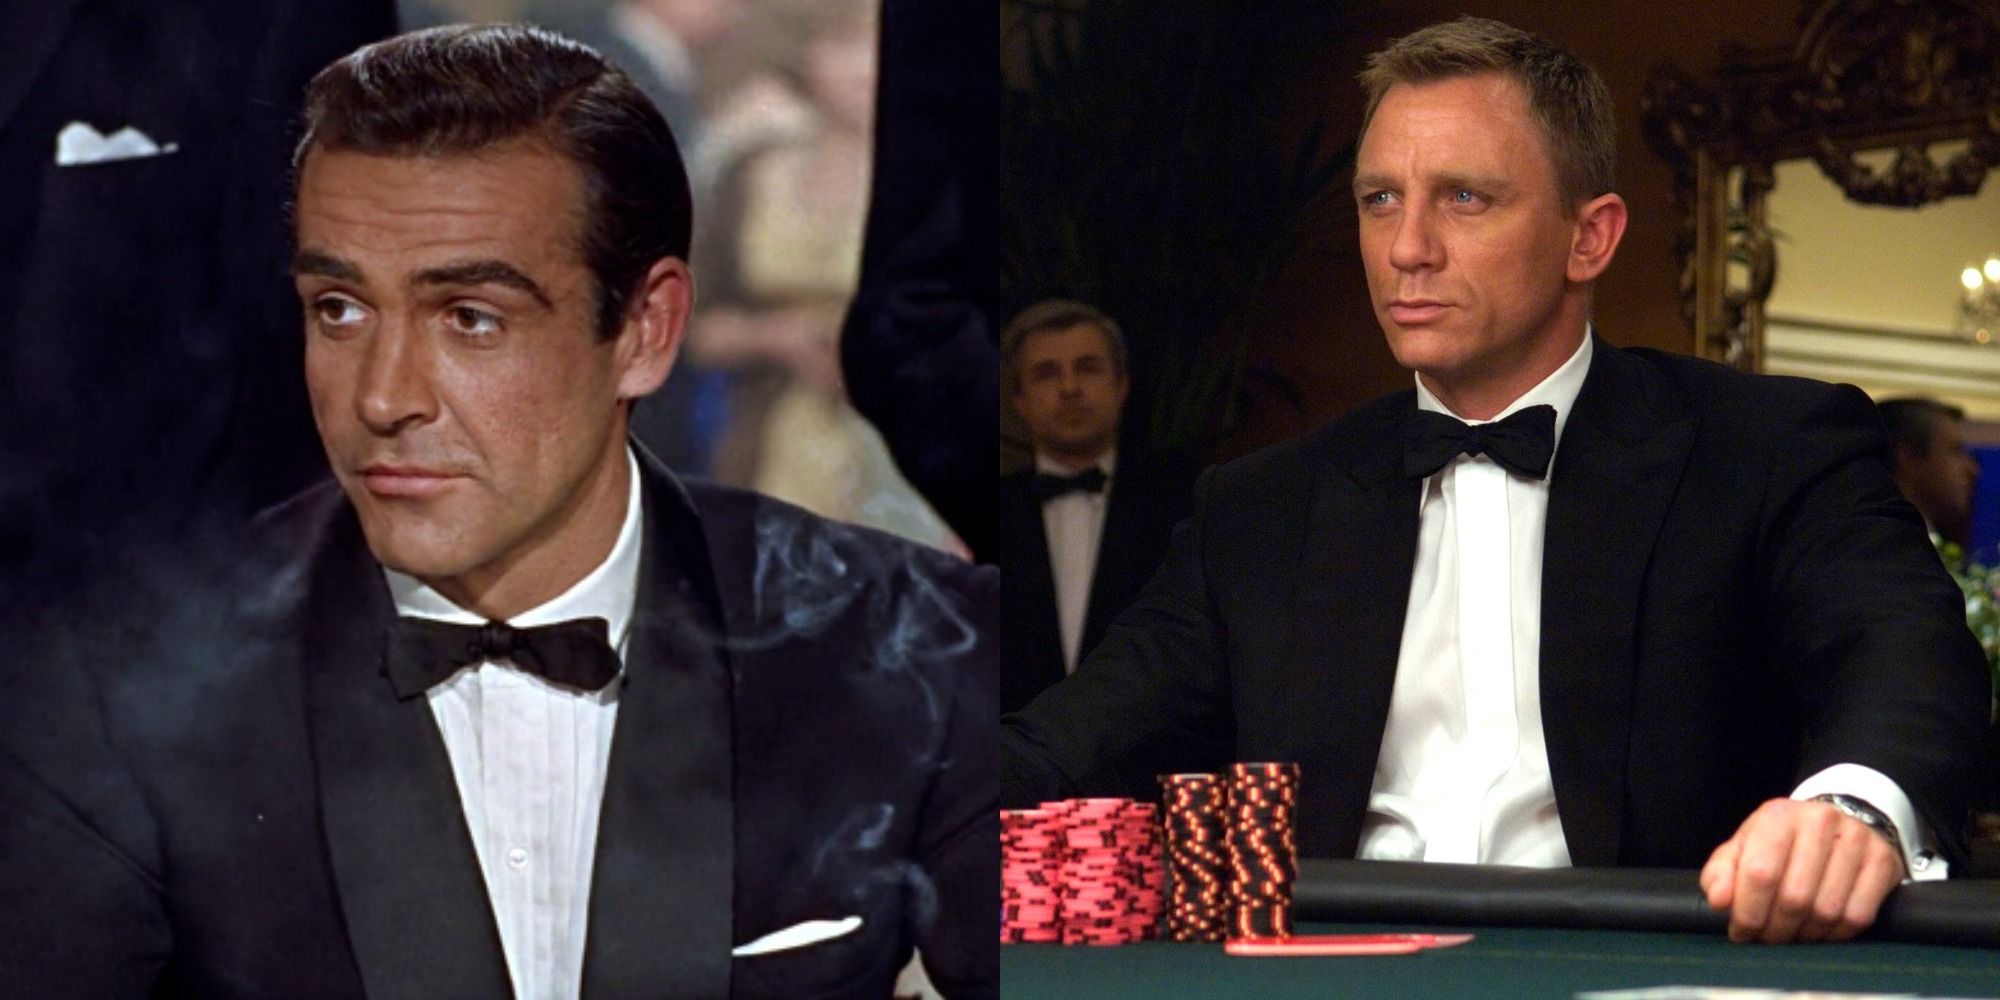 Sean Connery in Dr. No and Daniel Craig in Casino Royale